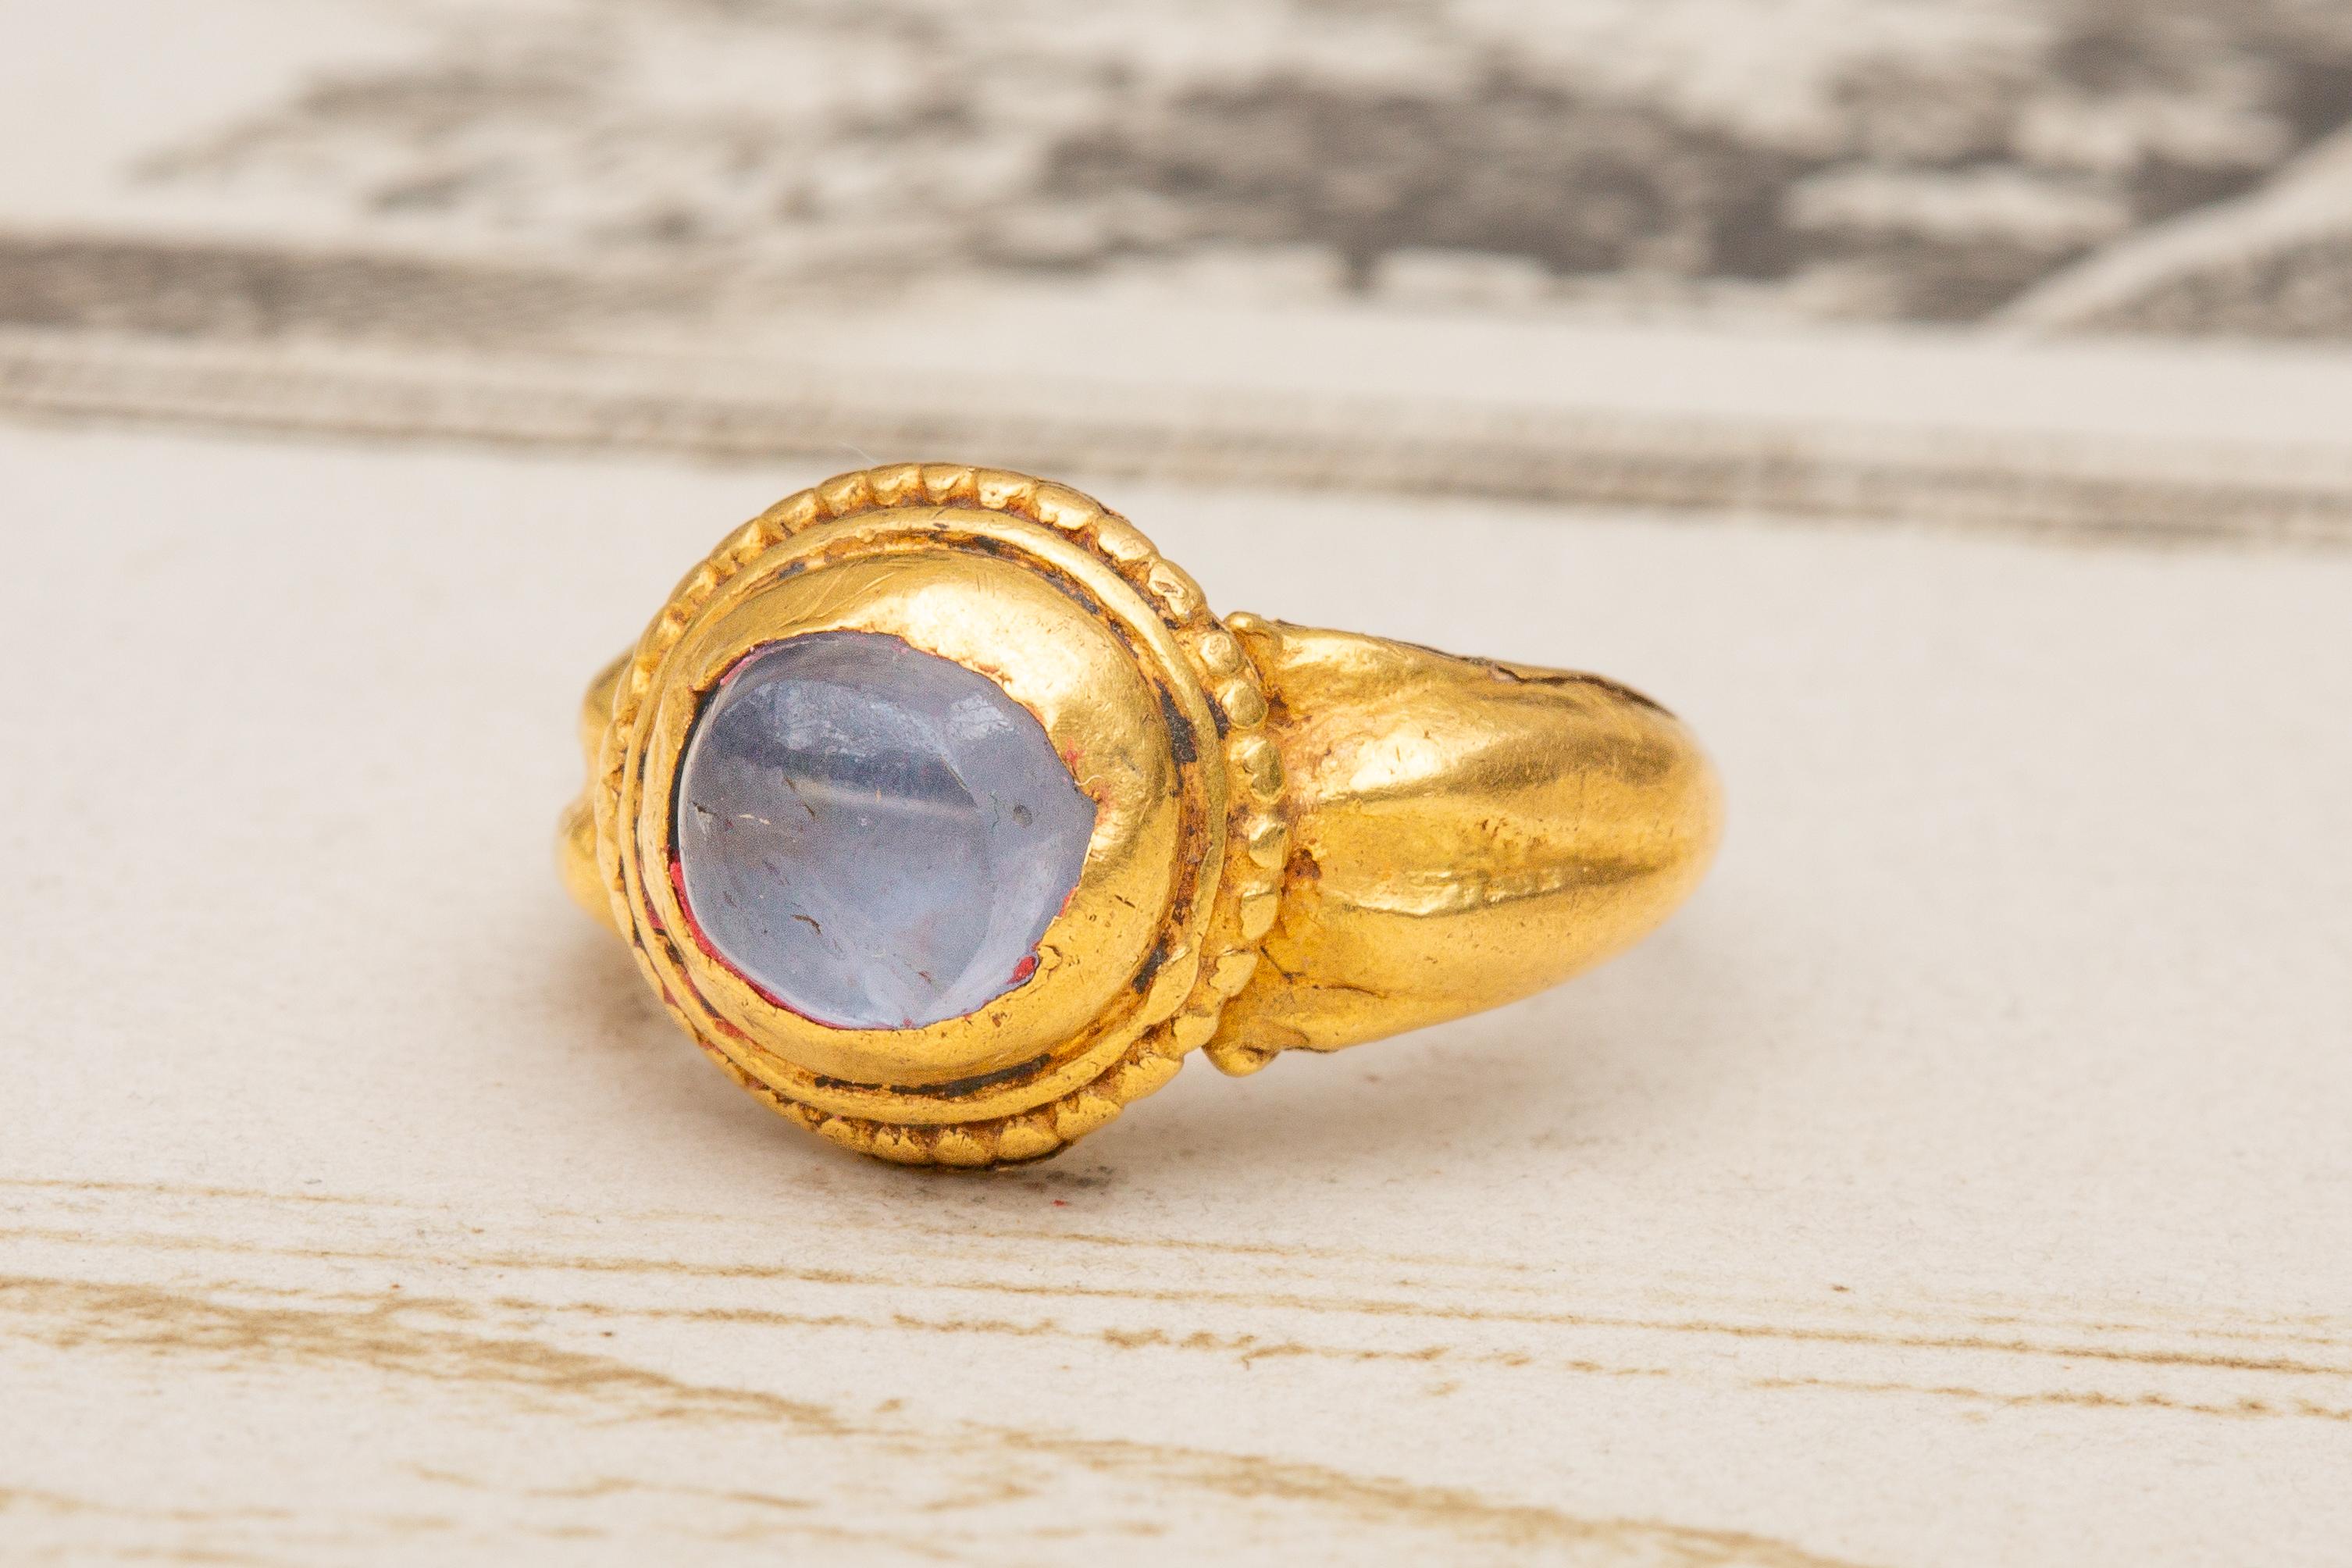 Ancient Javanese Gold and Sapphire Ring Cabochon 7th - 15th Century Indonesian  5